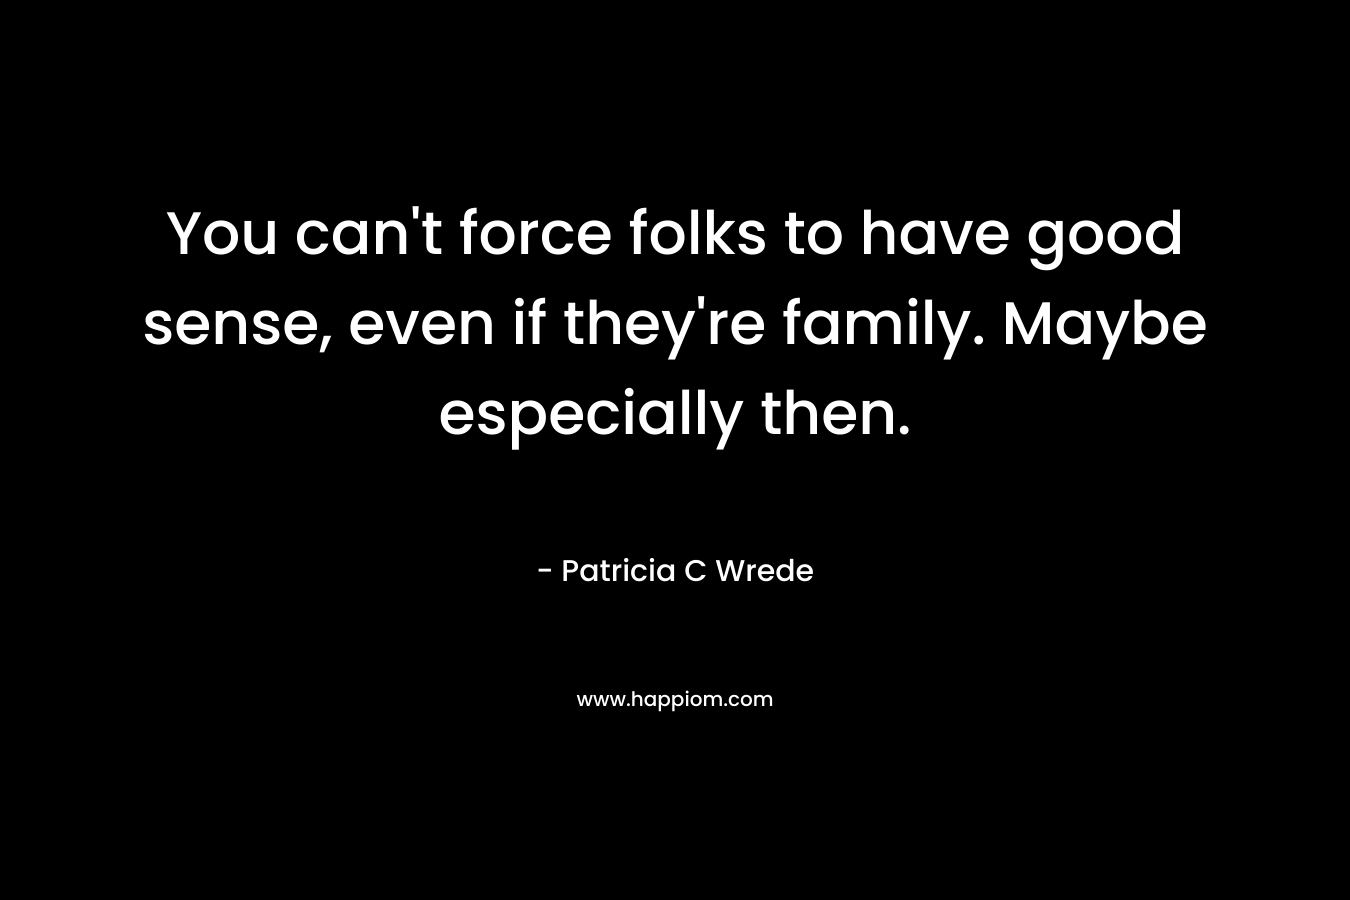 You can't force folks to have good sense, even if they're family. Maybe especially then.